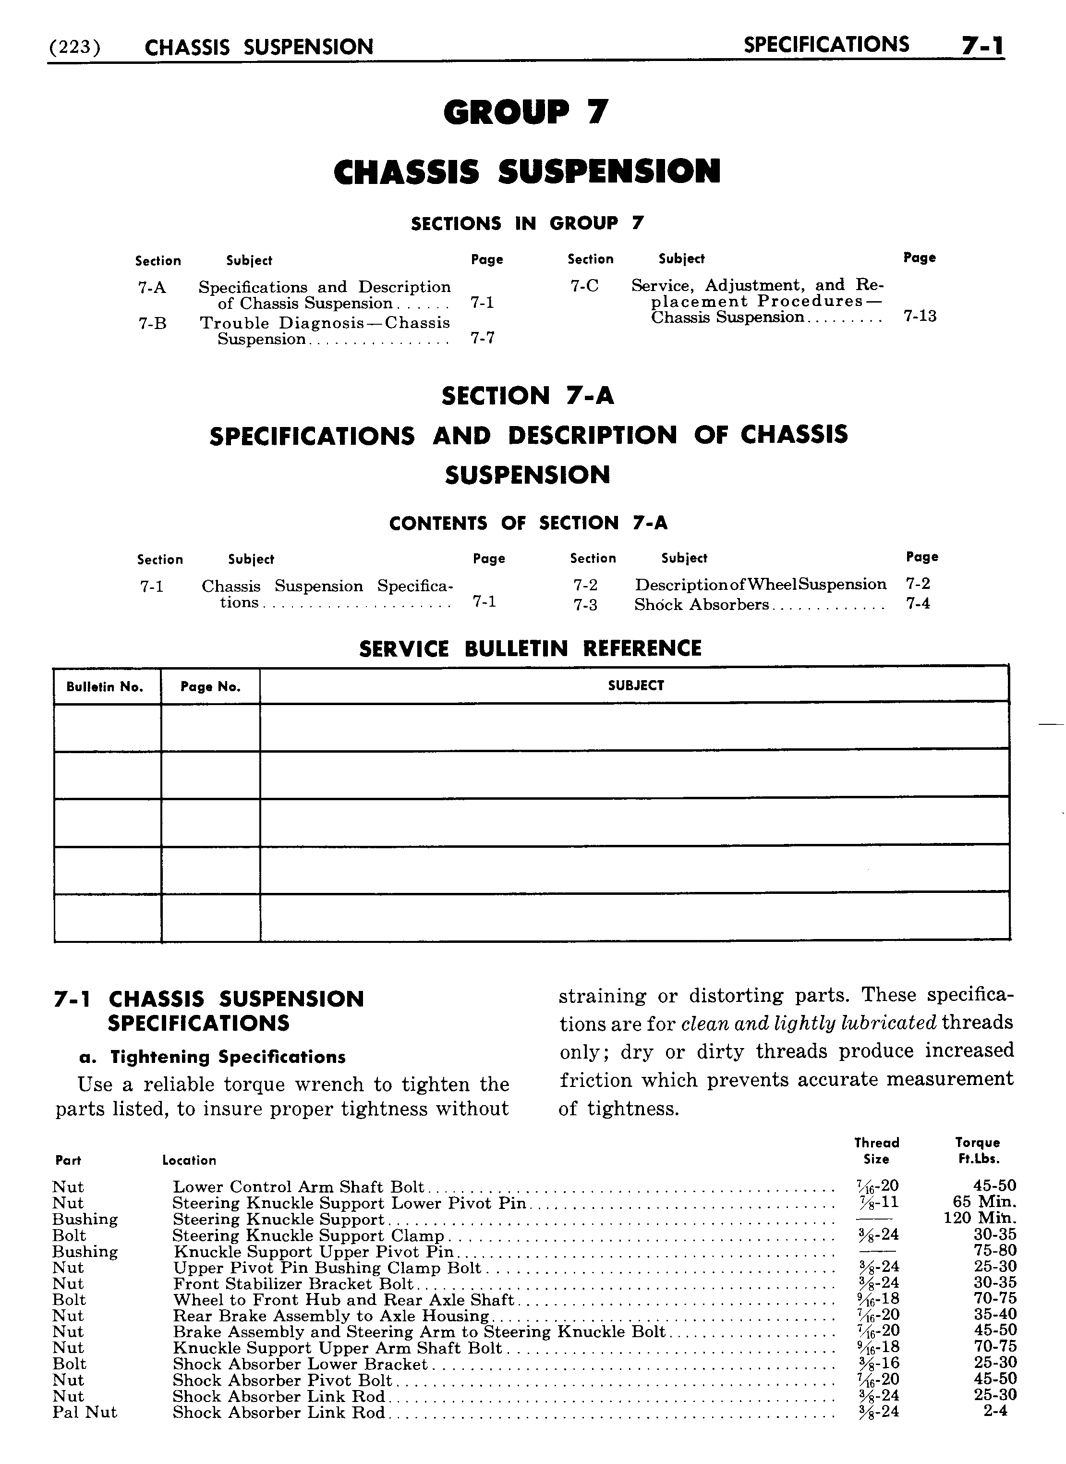 n_08 1955 Buick Shop Manual - Chassis Suspension-001-001.jpg